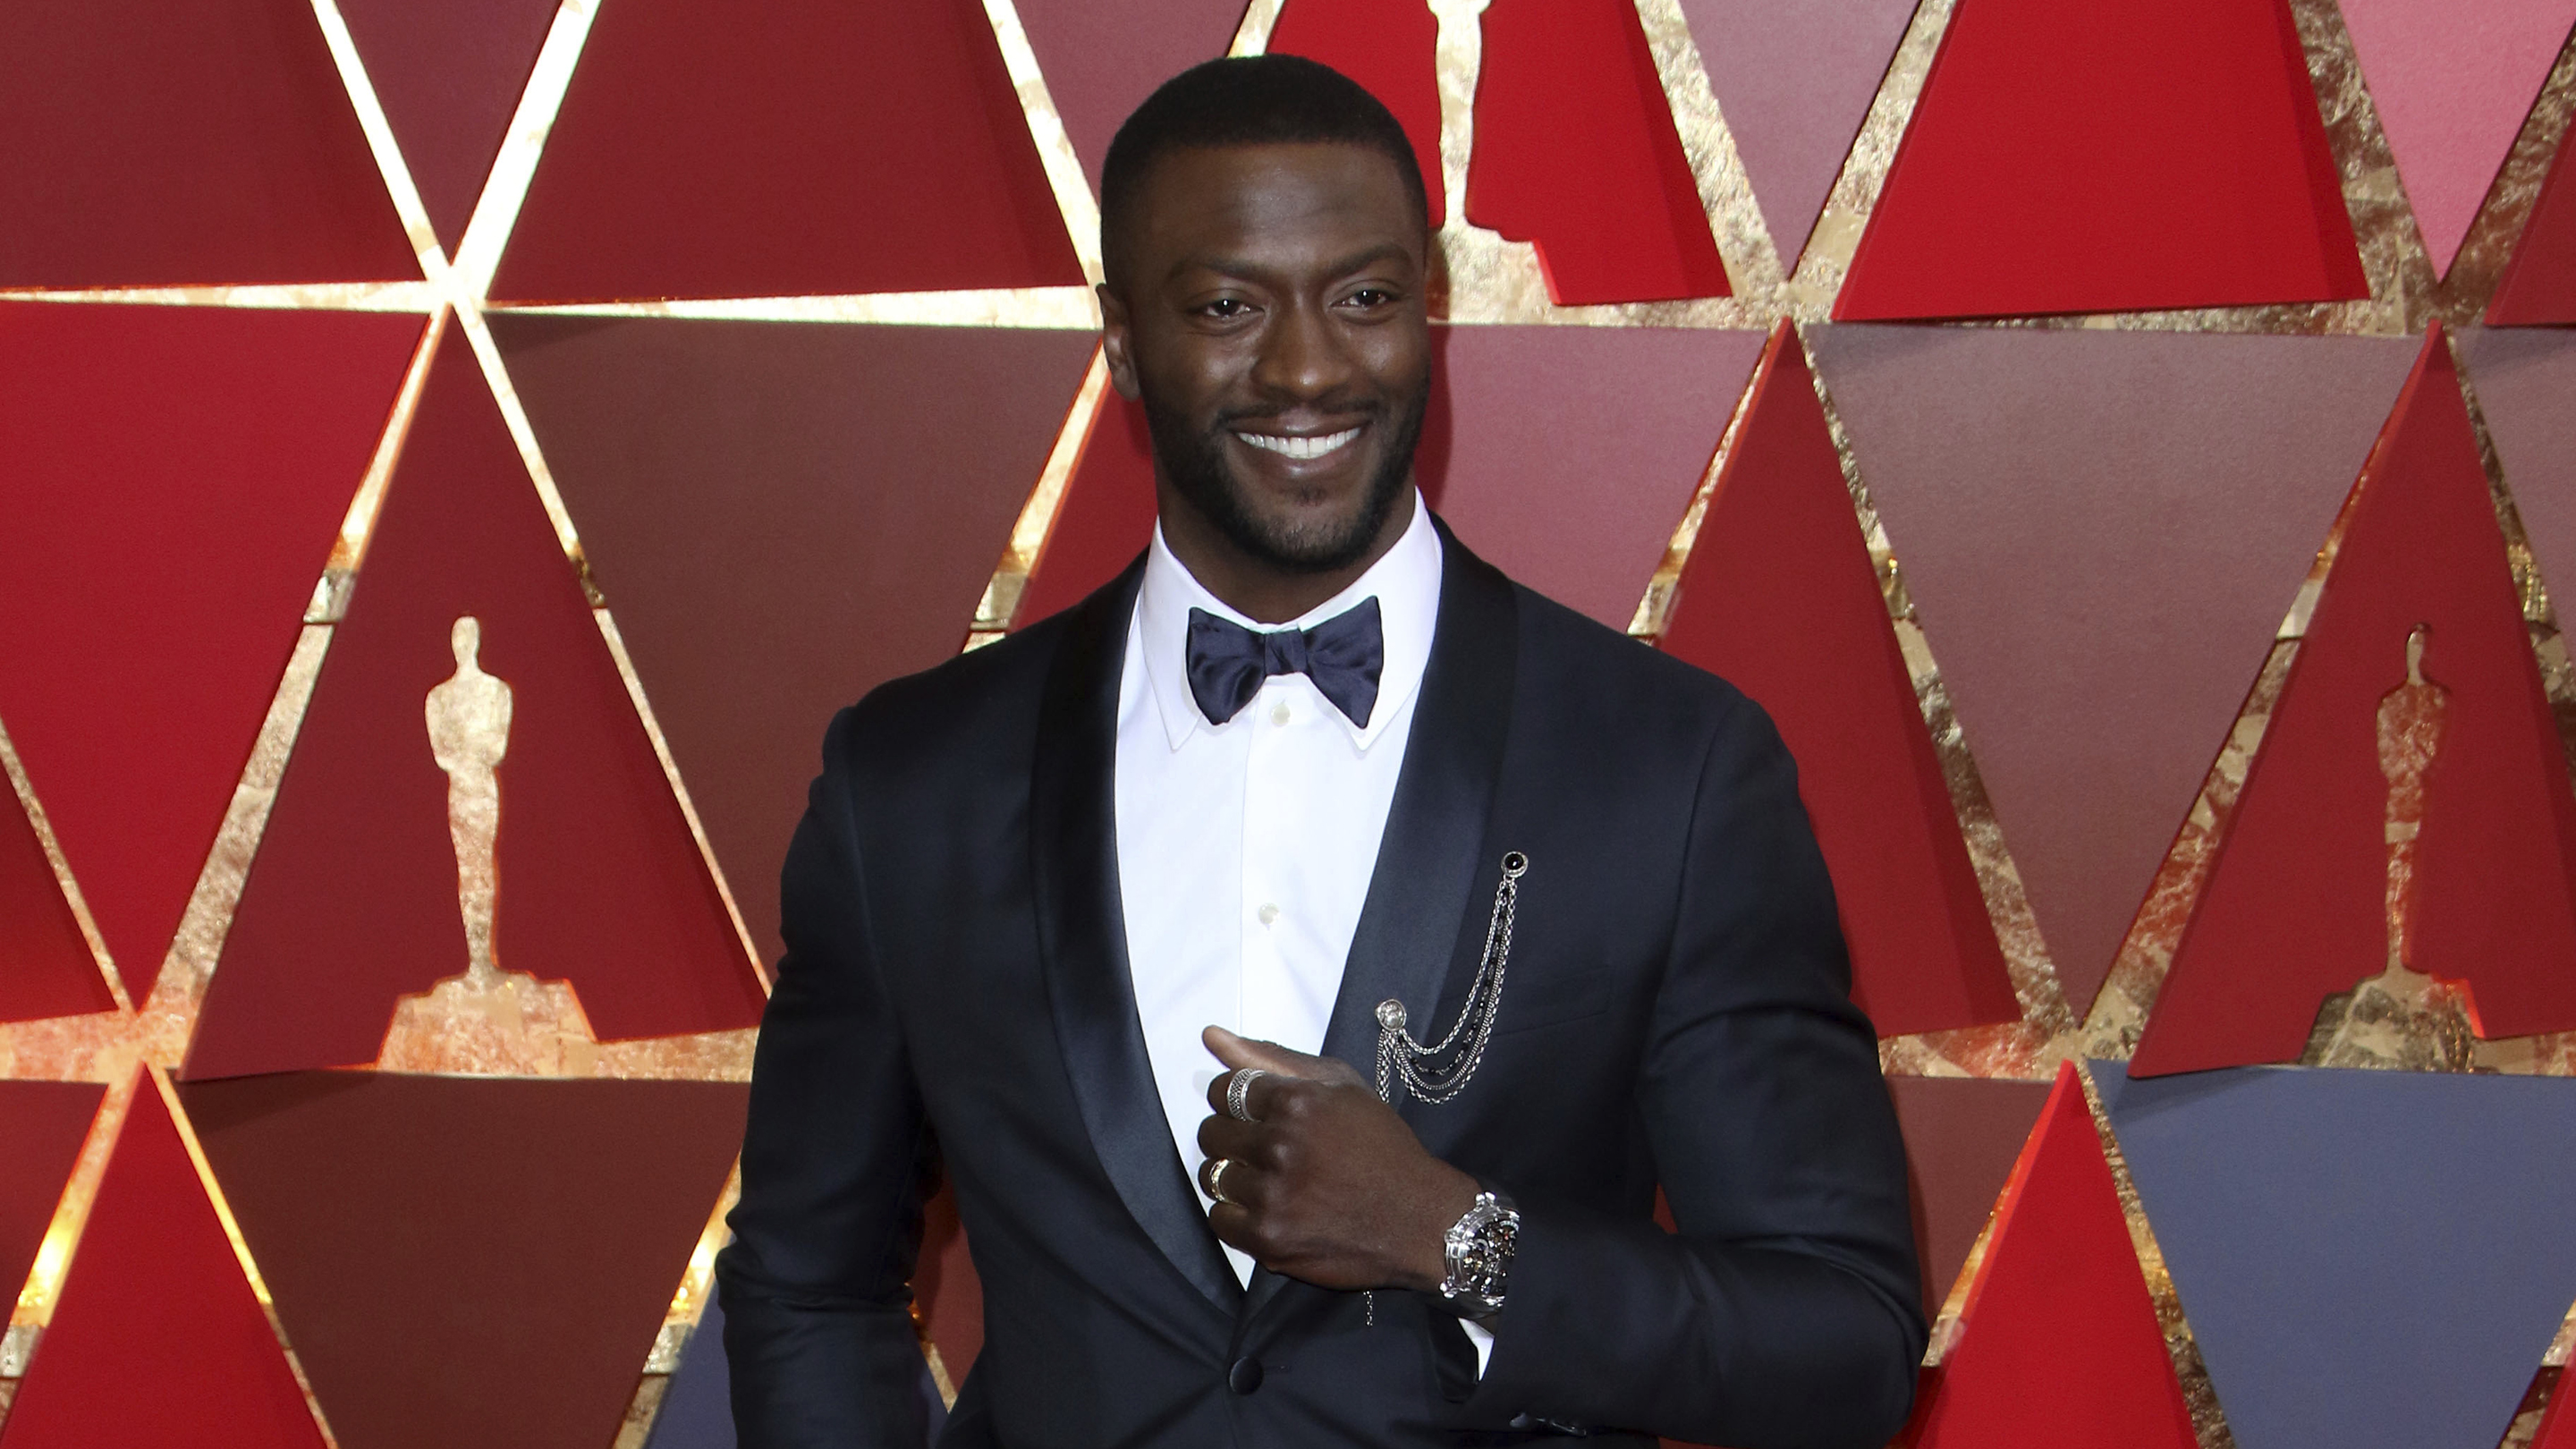 Watch Spotting: Aldis Hodge Rocking A Greubel Forsey Double 